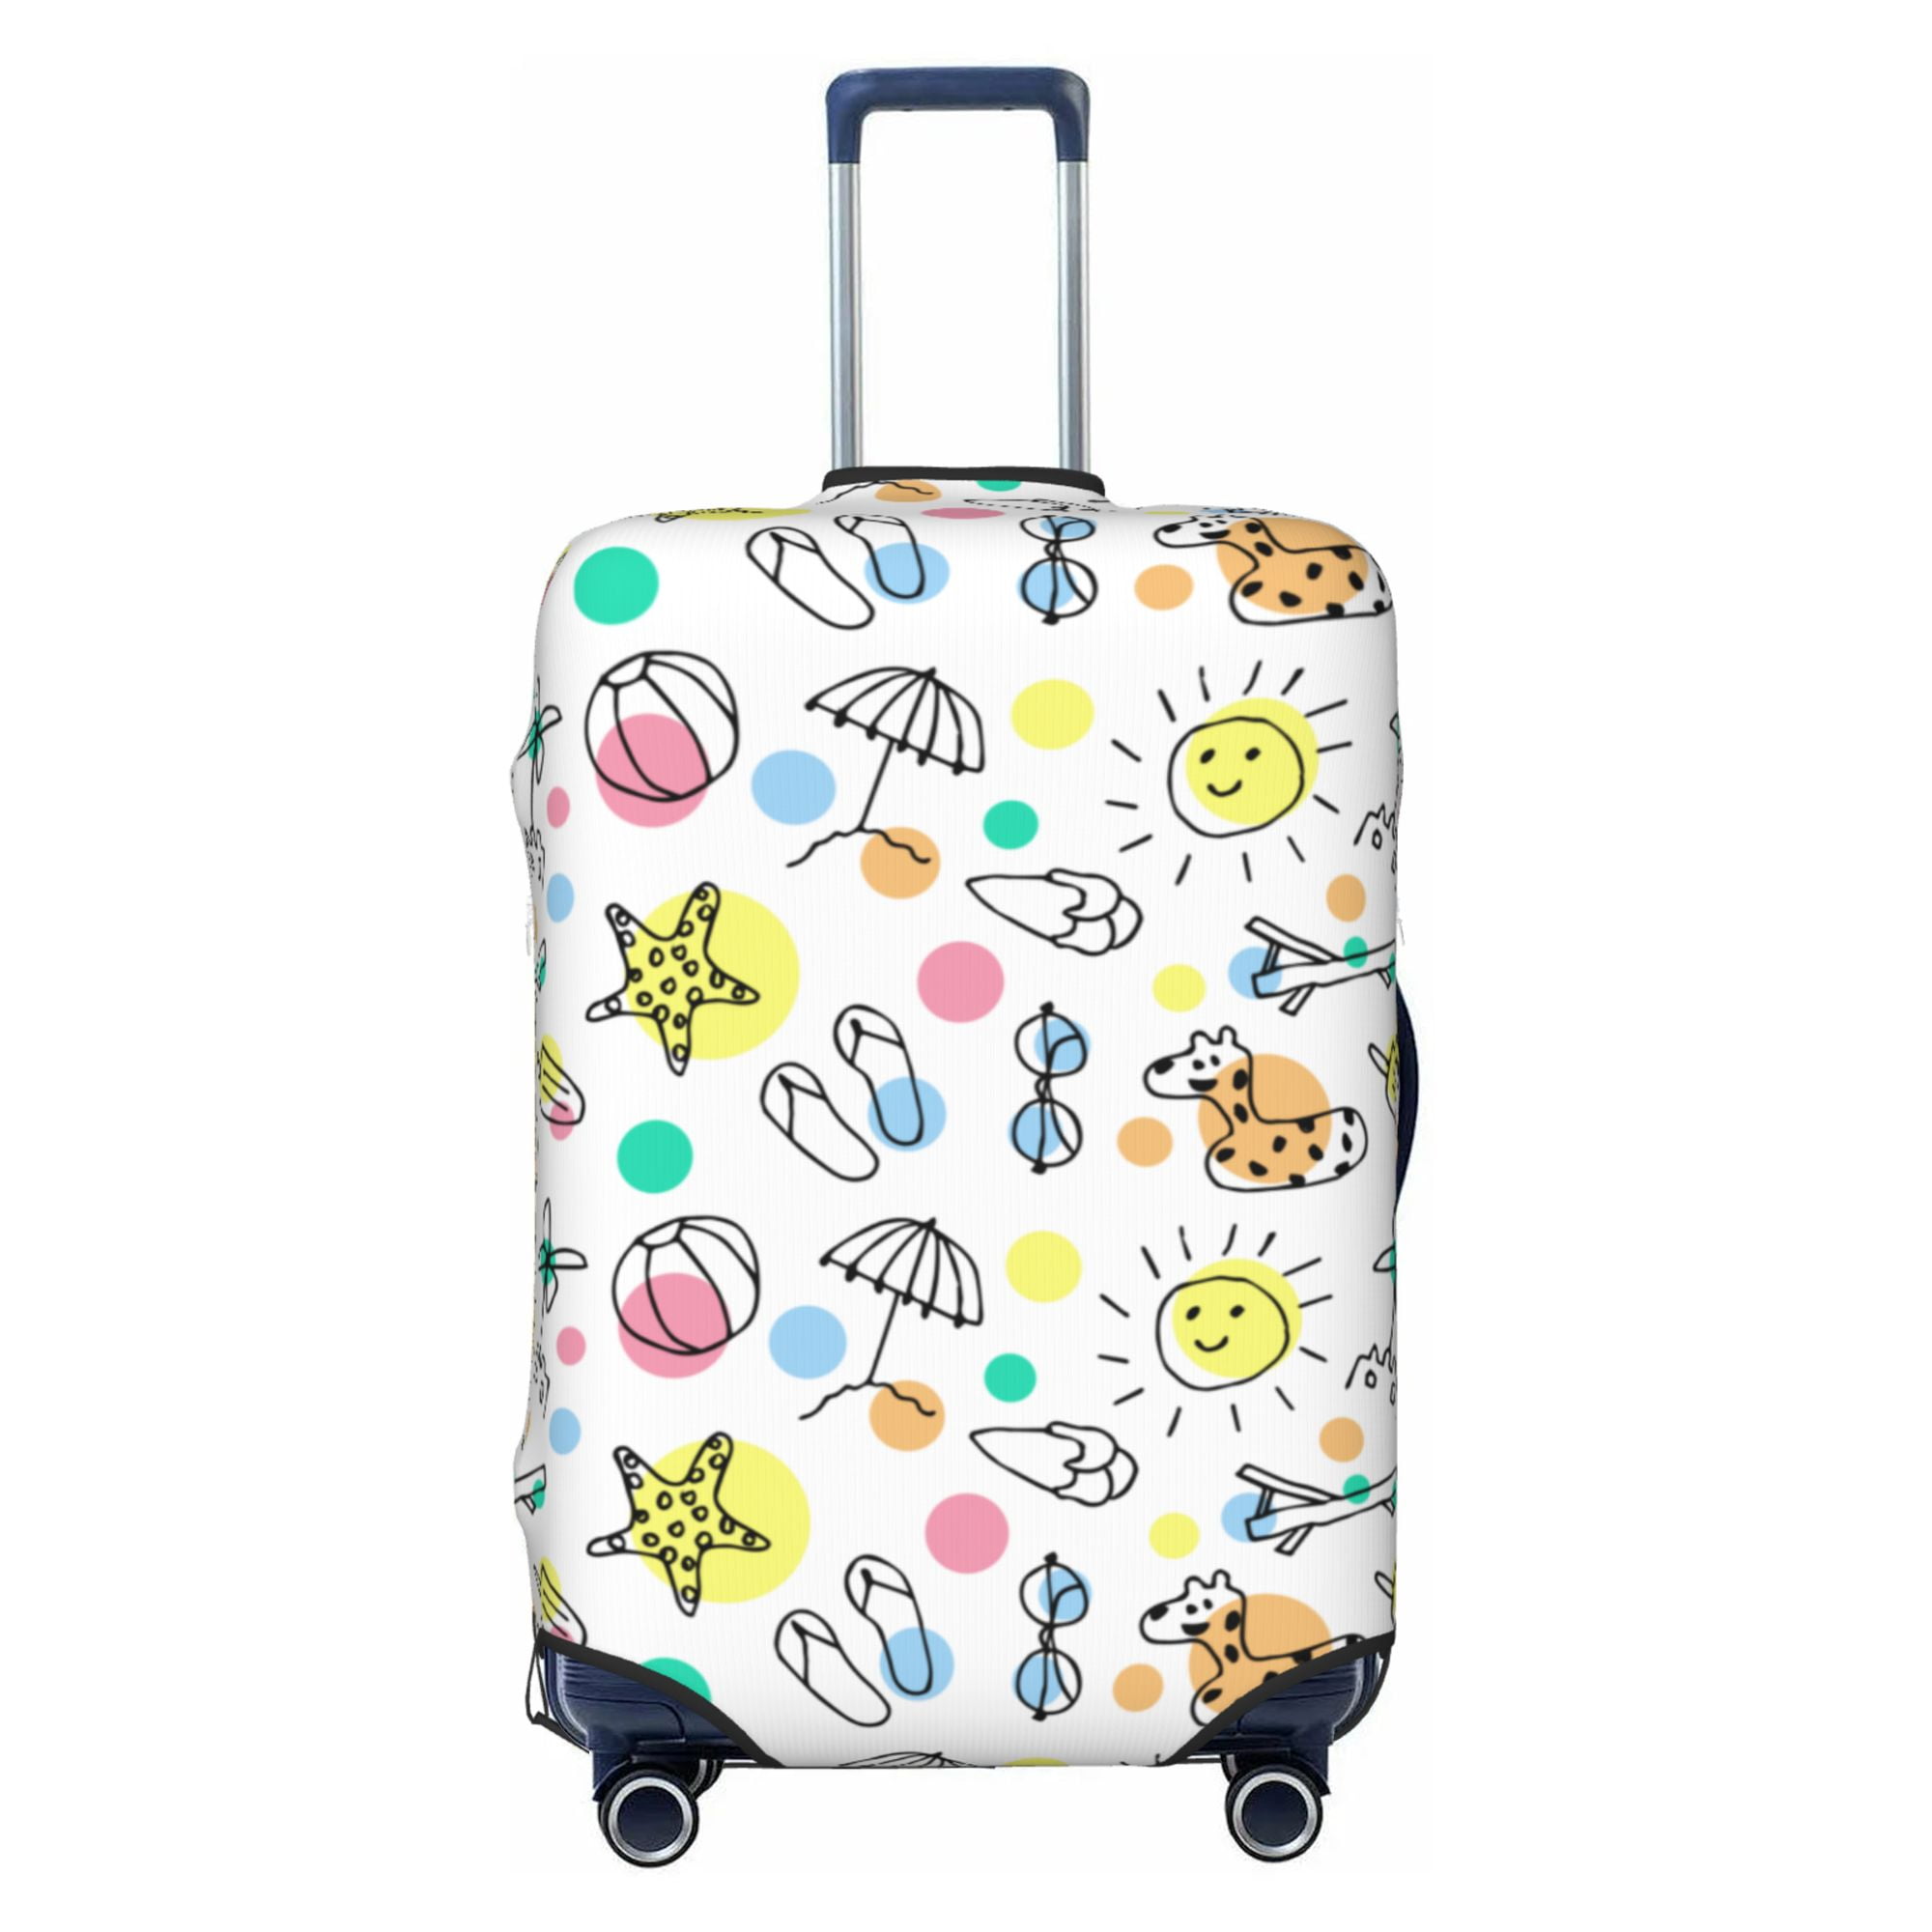 XMXY Travel Luggage Cover Protector, South American Circle Fabric